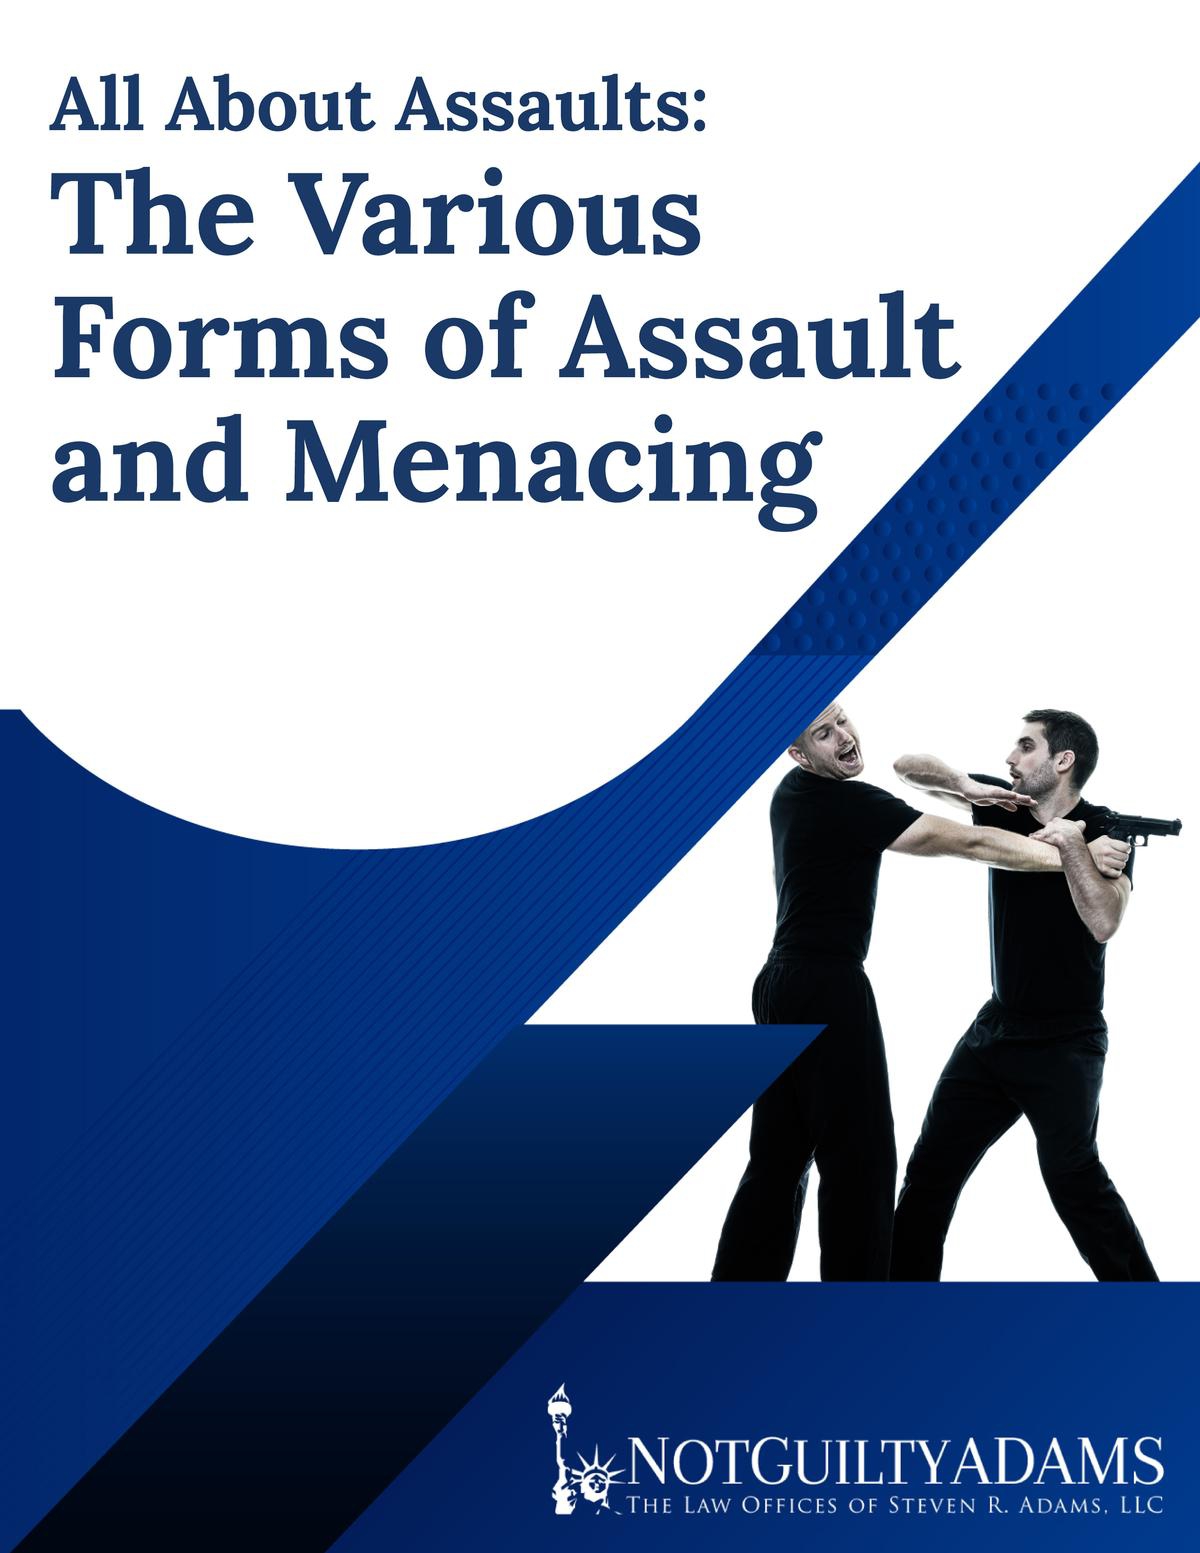 The Various Forms of Assault and Menacing